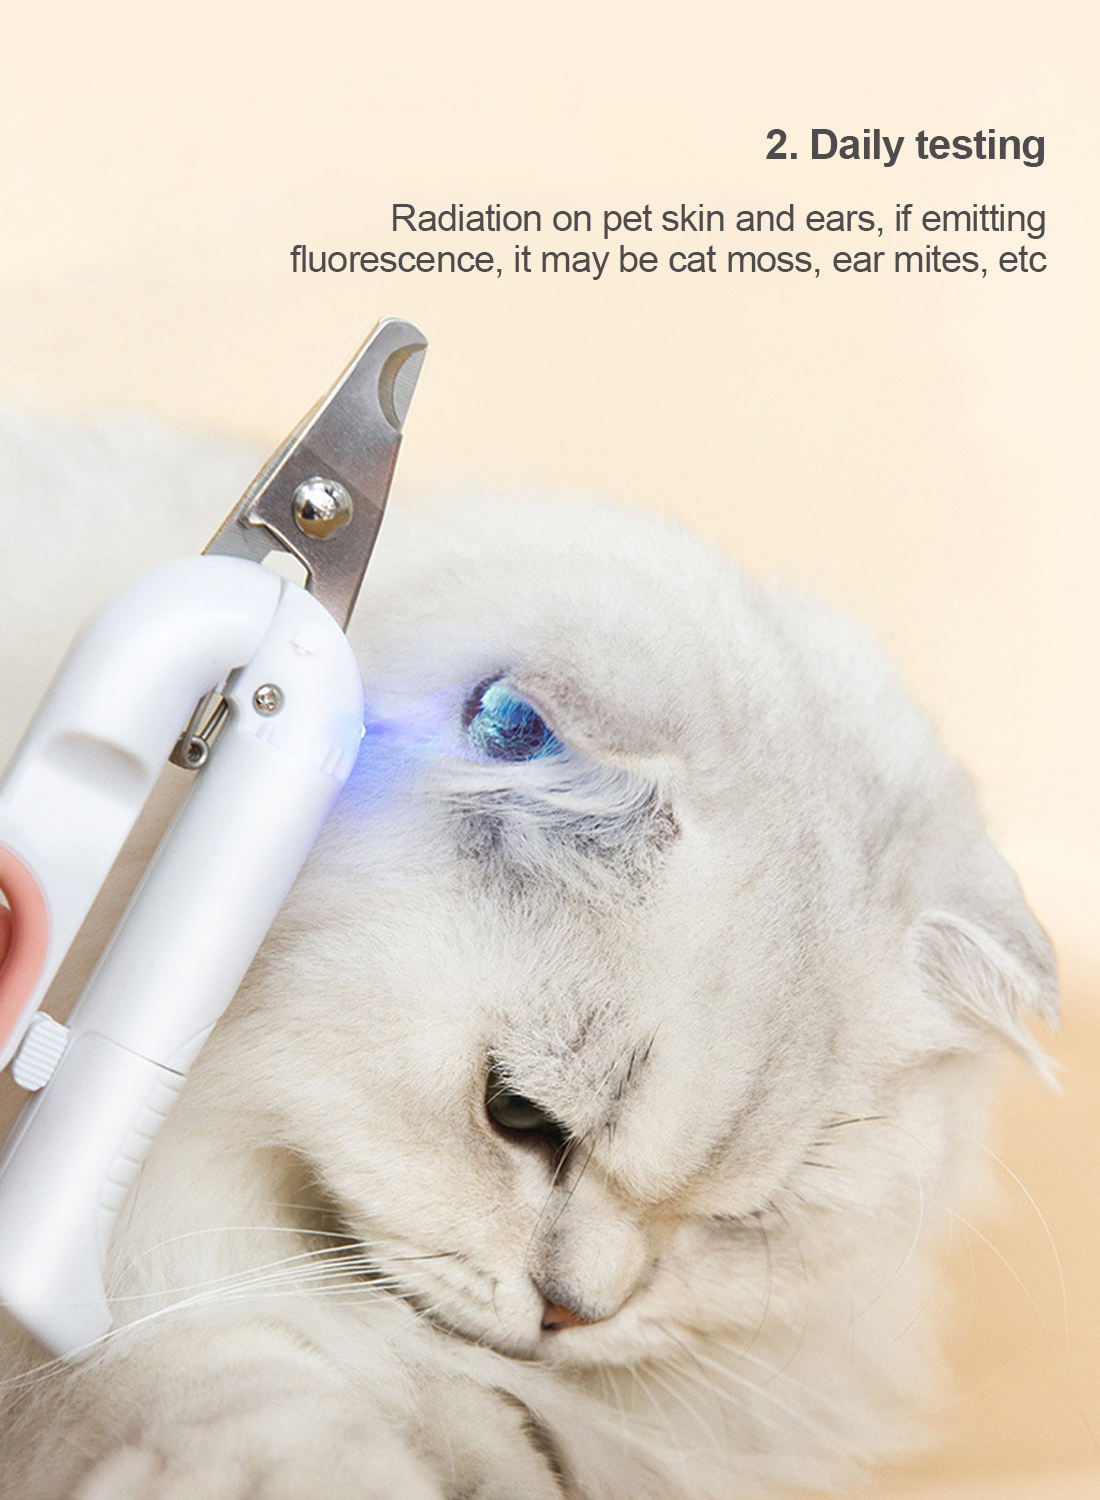 Pet Nail Clippers, Dog Nail Clippers, Cat Nail Clippers, LED Electric Nail Sharpeners, Pet Products